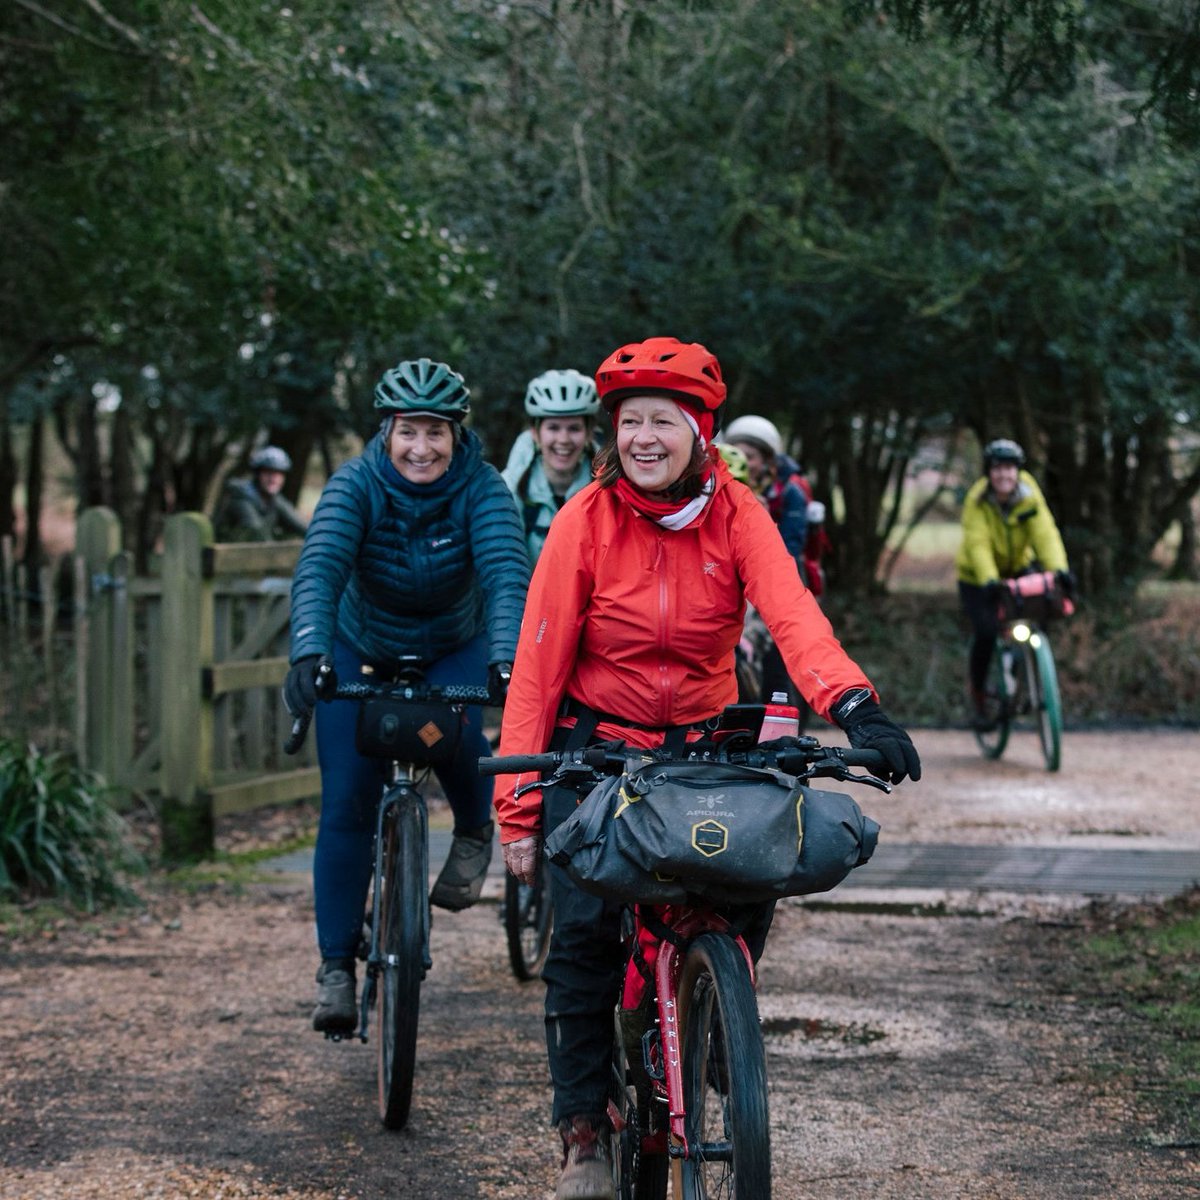 🚴‍♀️ Discover the New Forest Off-Road Club, reshaping cycling. Affiliated with Cycling UK, they aim to increase outdoor representation. All levels and bikes welcome! Explore 100+ miles of gravel tracks in the heart of the New Forest. 💚 More info: cyclinguk.org/new-forest-off…